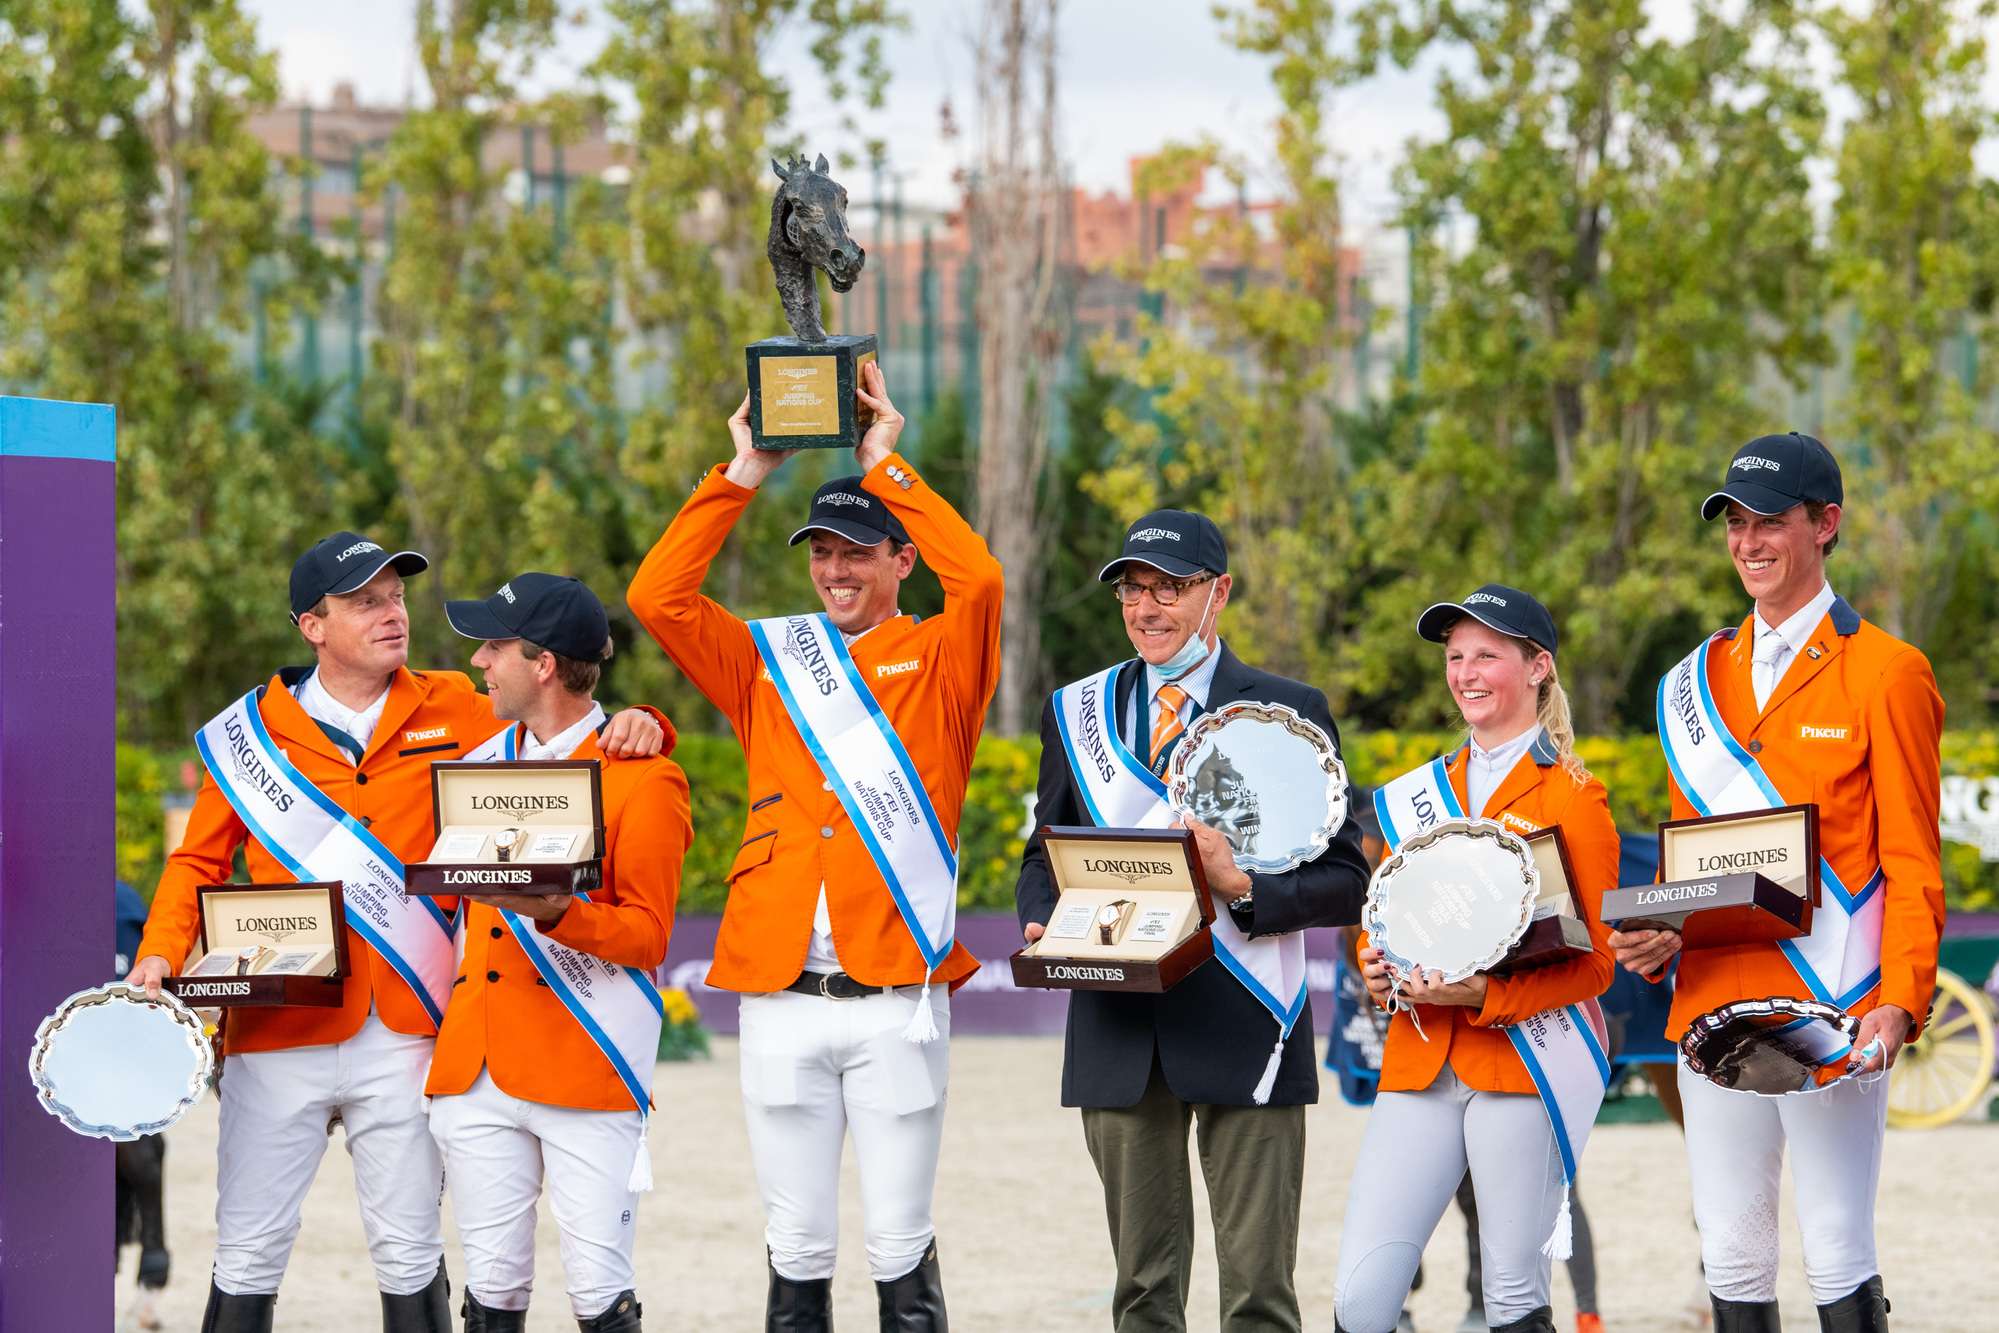 The Dutch champions on the podium at the Longines FEI Jumping Nations Cup™ 2021 Final at the Real Club de Polo in Barcelona, Spain - (L to R) Willem Greve, Maikel van der Vleuten, Harrie Smolders, Rob Ehrens (Chef dEquipe), Sanne Thijssen and Kevin Jochems. (FEI/Lukasz Kowalski)